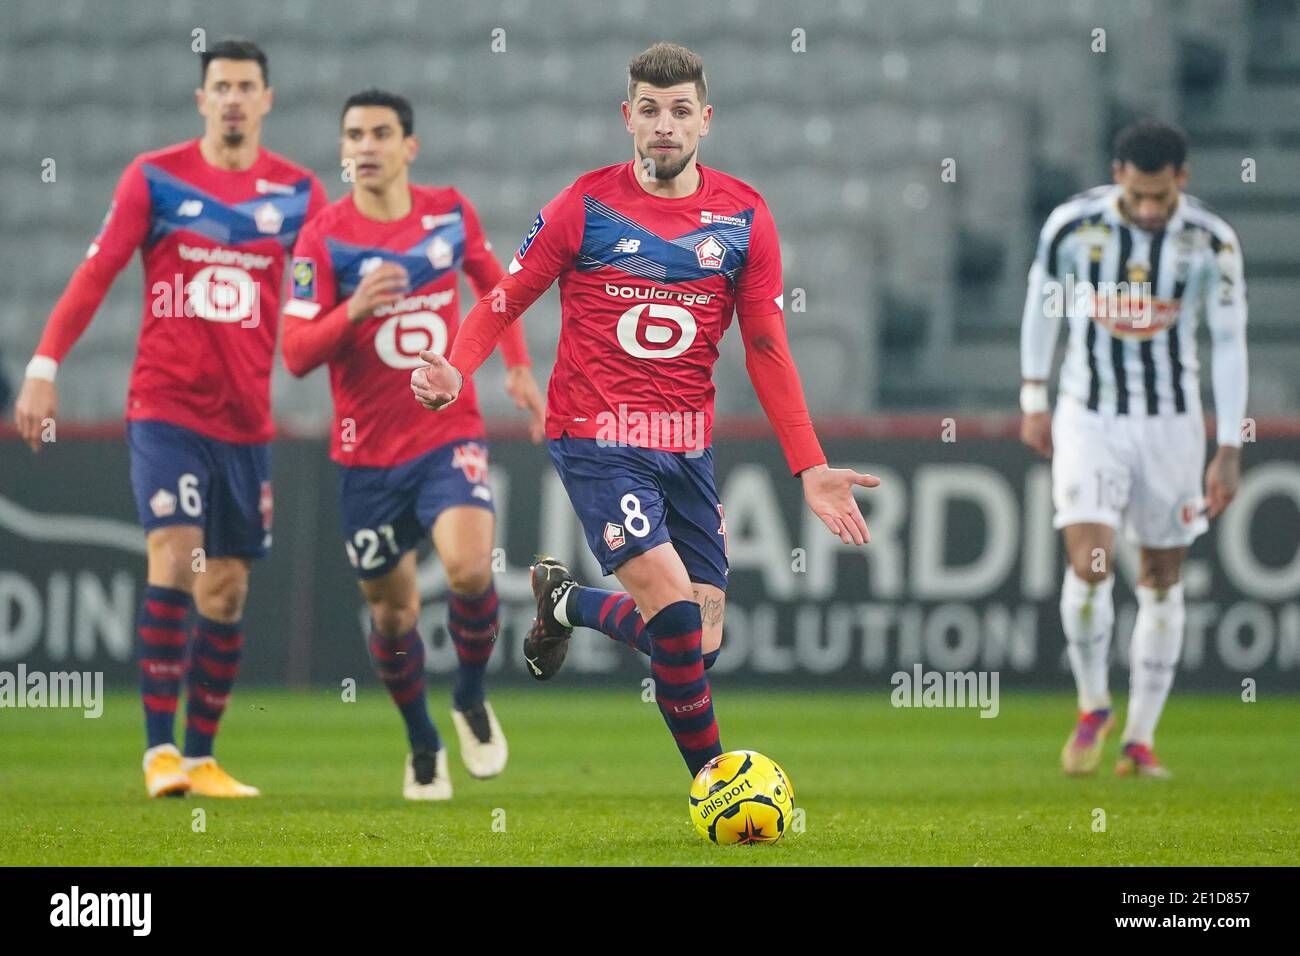 LILLE, FRANCE - JANUARY 6: Xeka of Lille OSC during the Ligue 1 match between Lille OSC and Angers SCO at Stade Pierre Mauroy on January 6, 2021 in Lille, France (Photo by Jeroen Meuwsen/BSR Agency/Alamy Live News)*** Local Caption *** Xeka Stock Photo